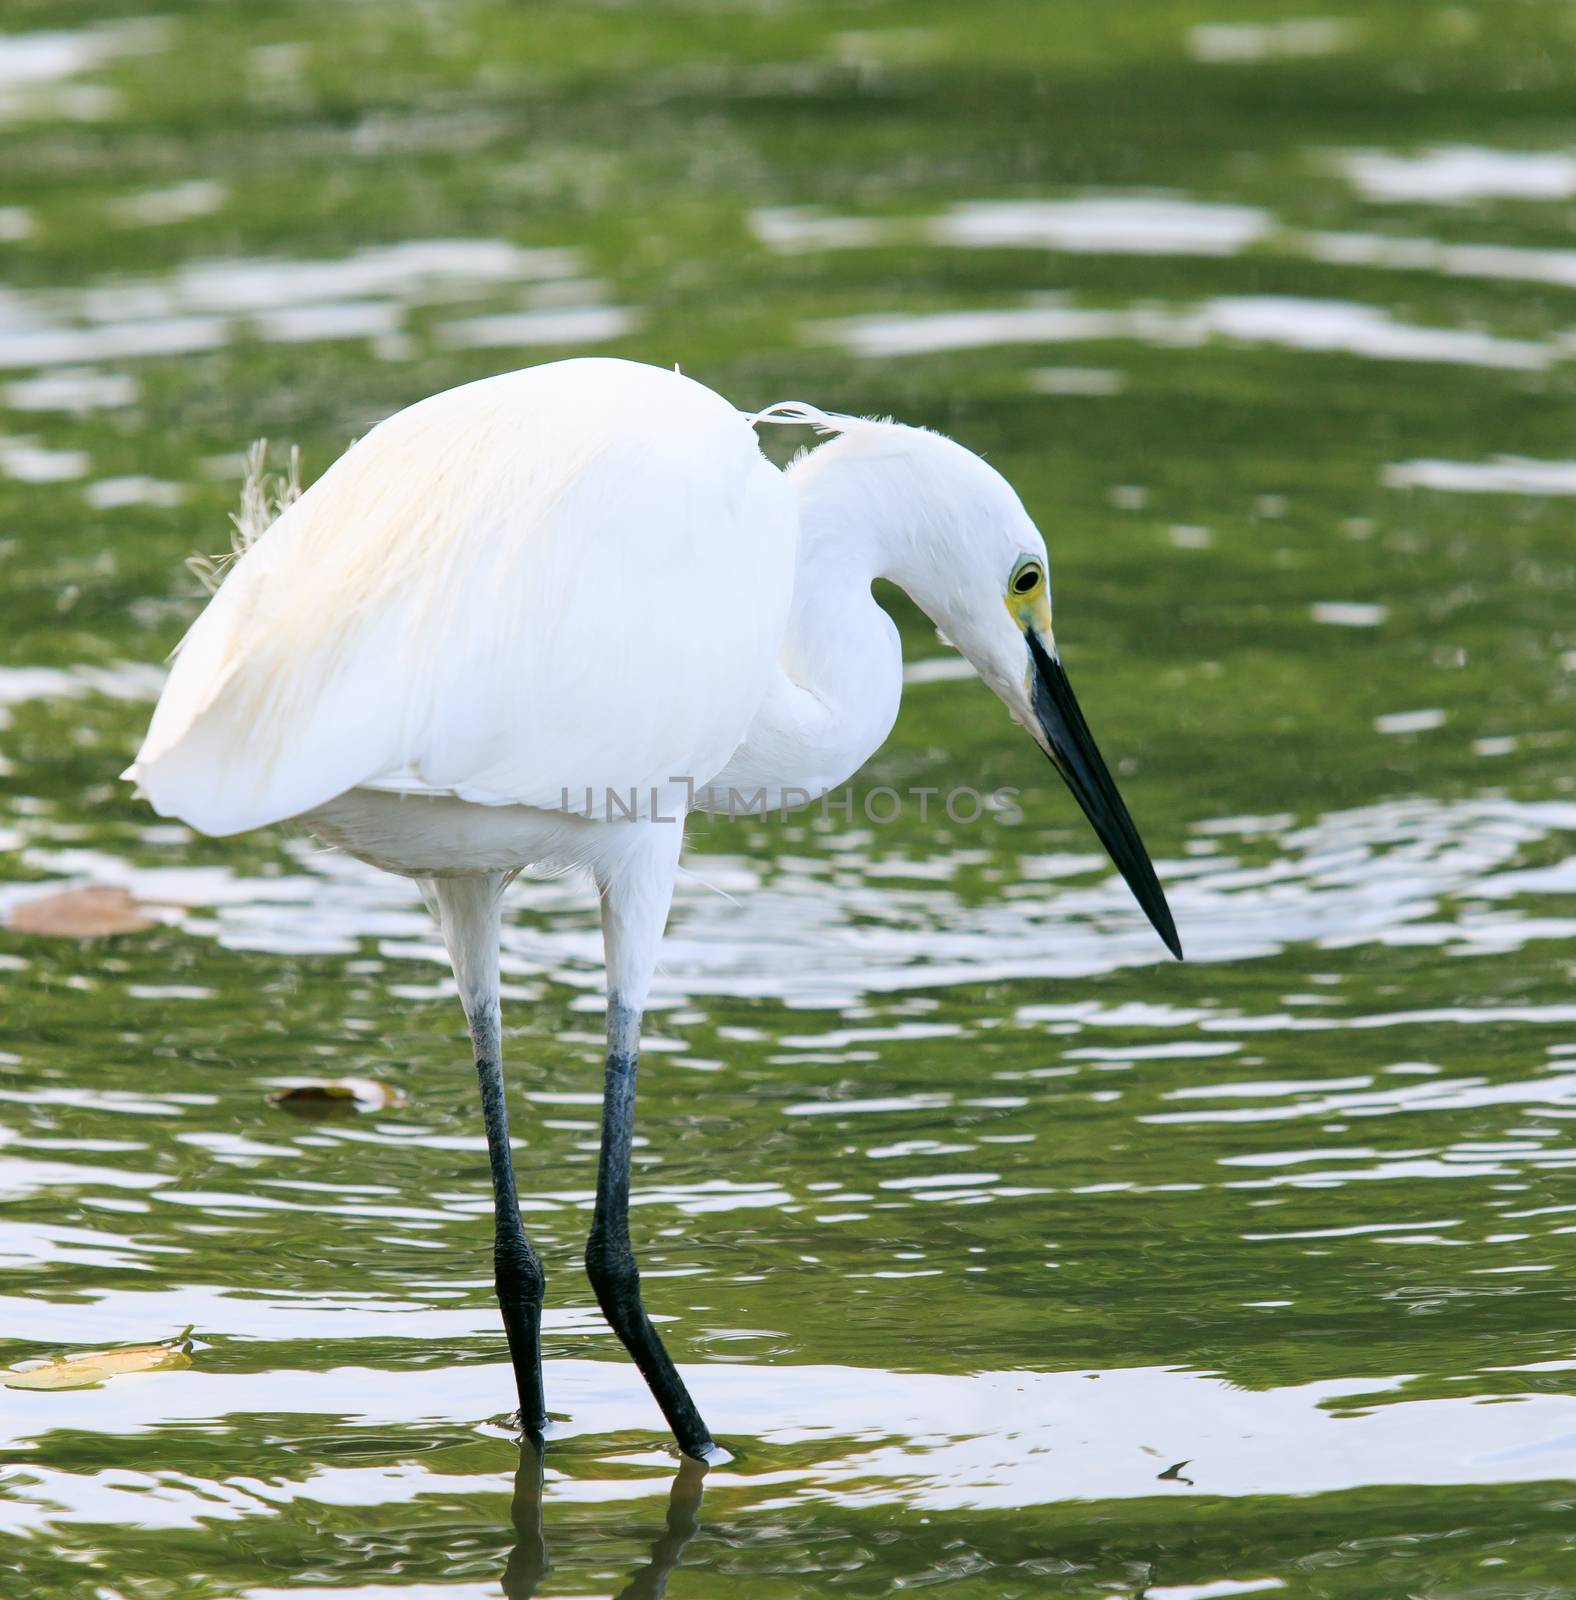 wild little egret bird feeding in water pool use for animals and wildlife in nature habitat